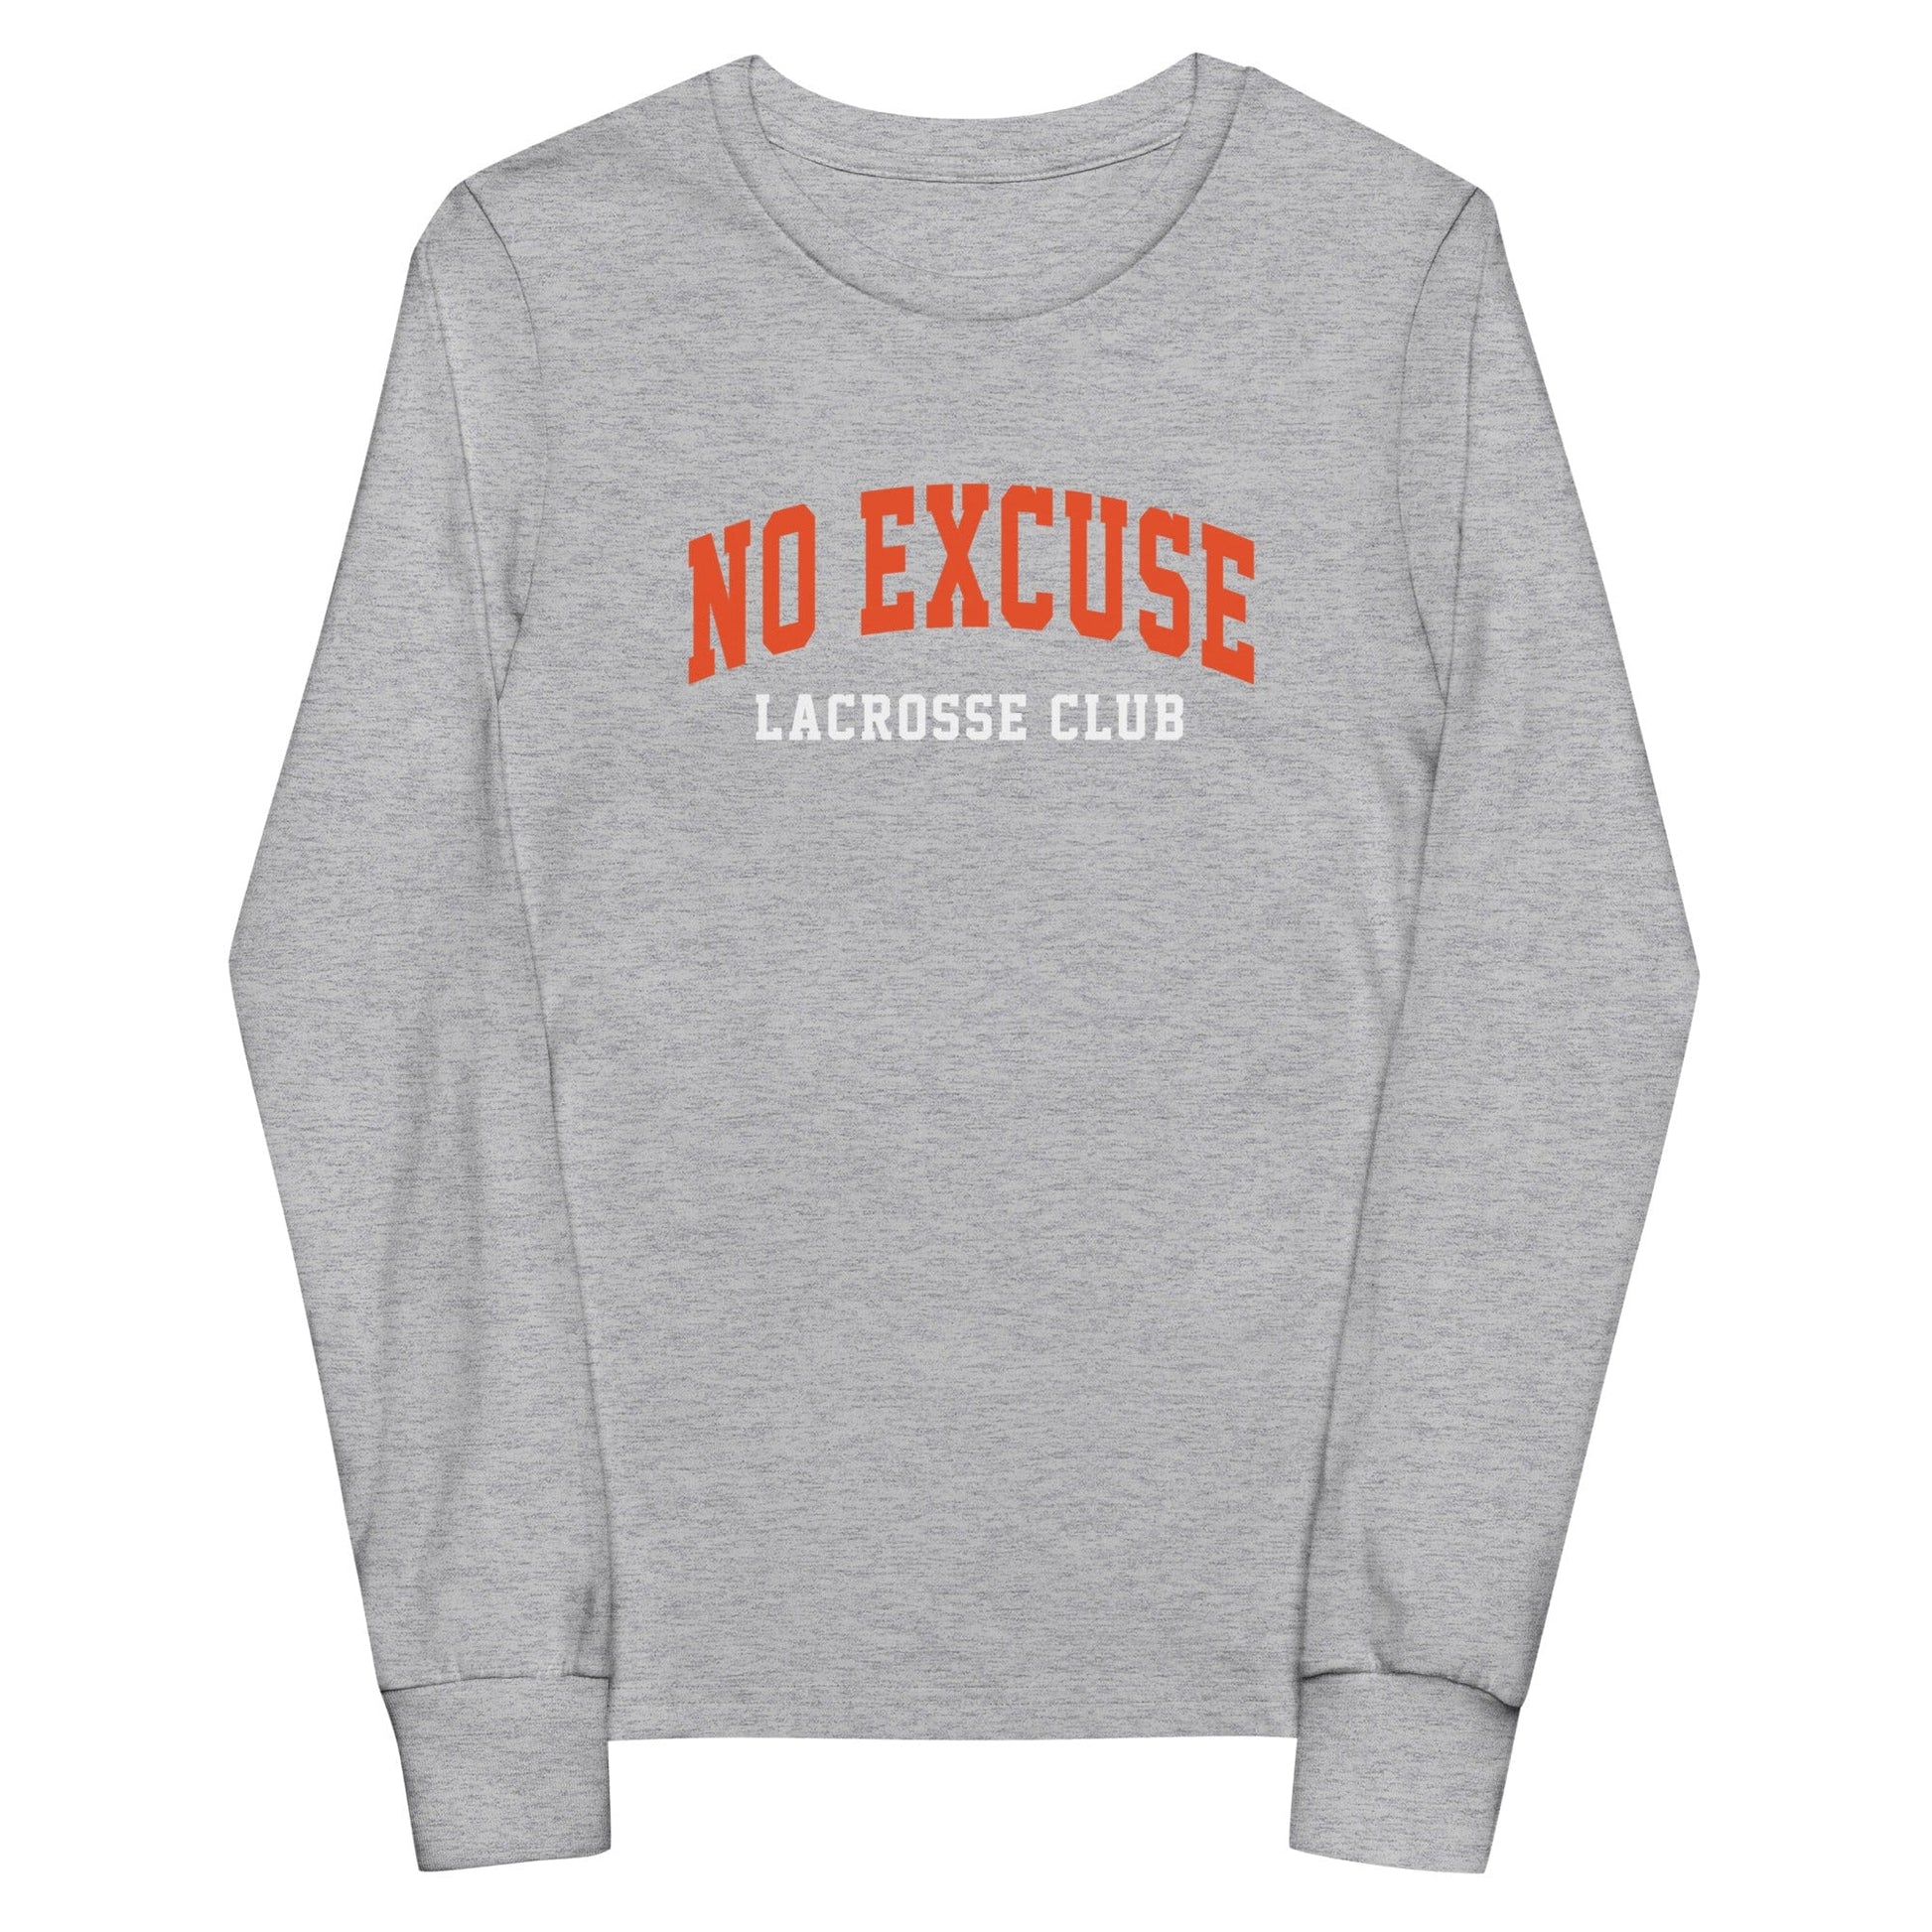 No-Excuse Lacrosse Youth Cotton Long Sleeve T-Shirt Signature Lacrosse